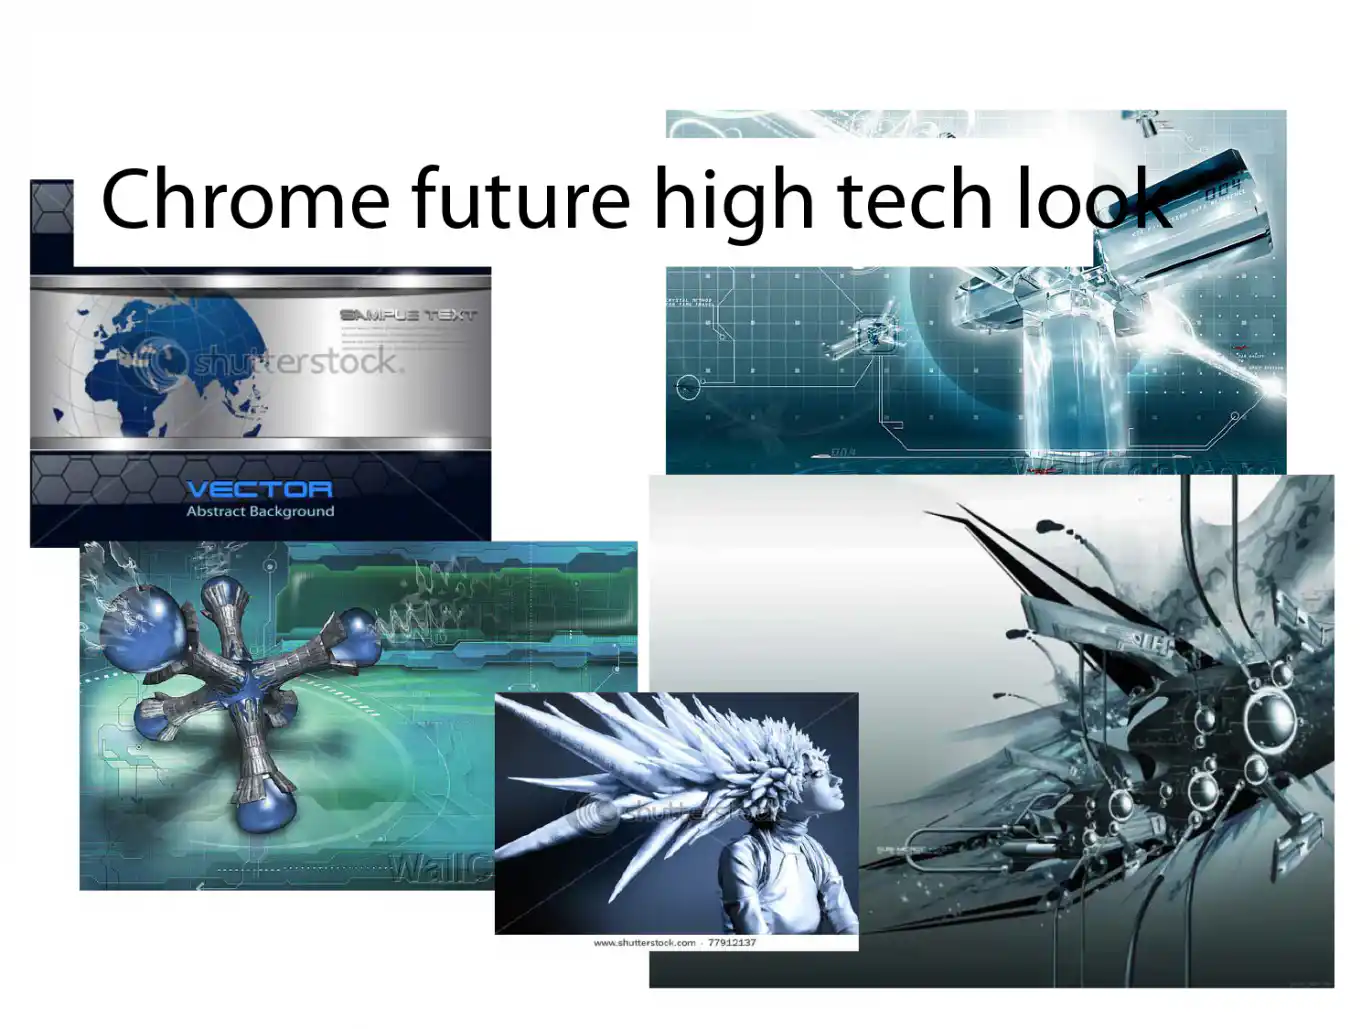 image showing chrome high tech looking images